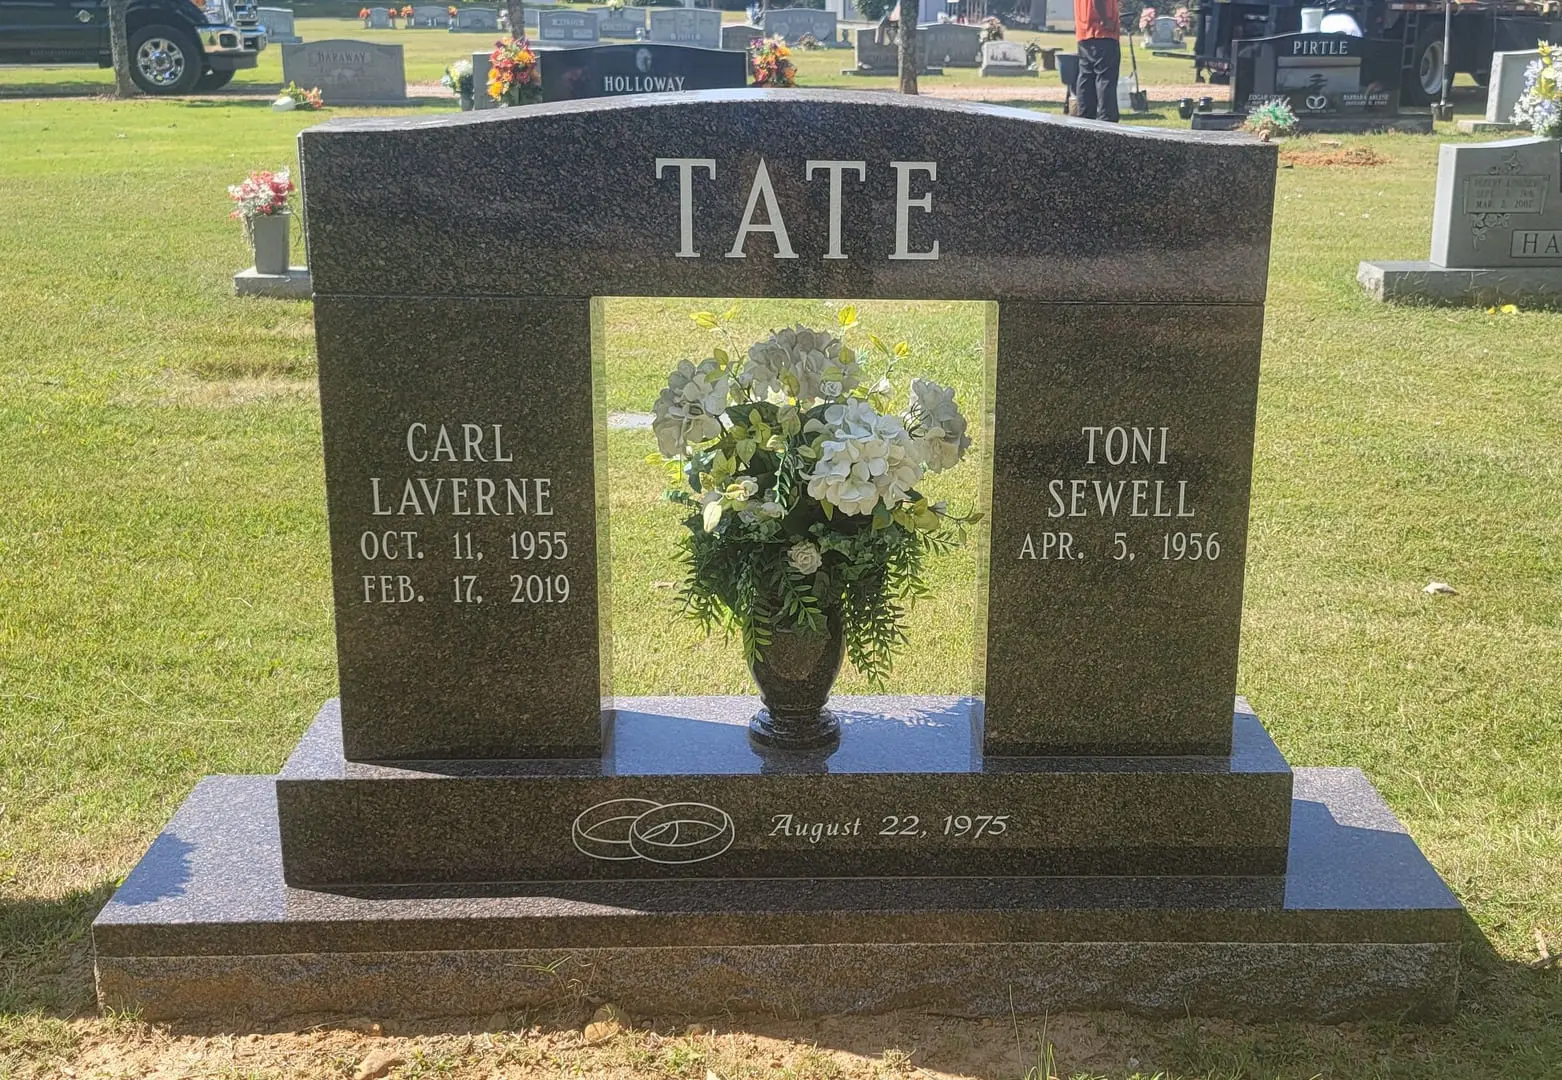 A memorial slab for Carl Laverne and Toni Sewell